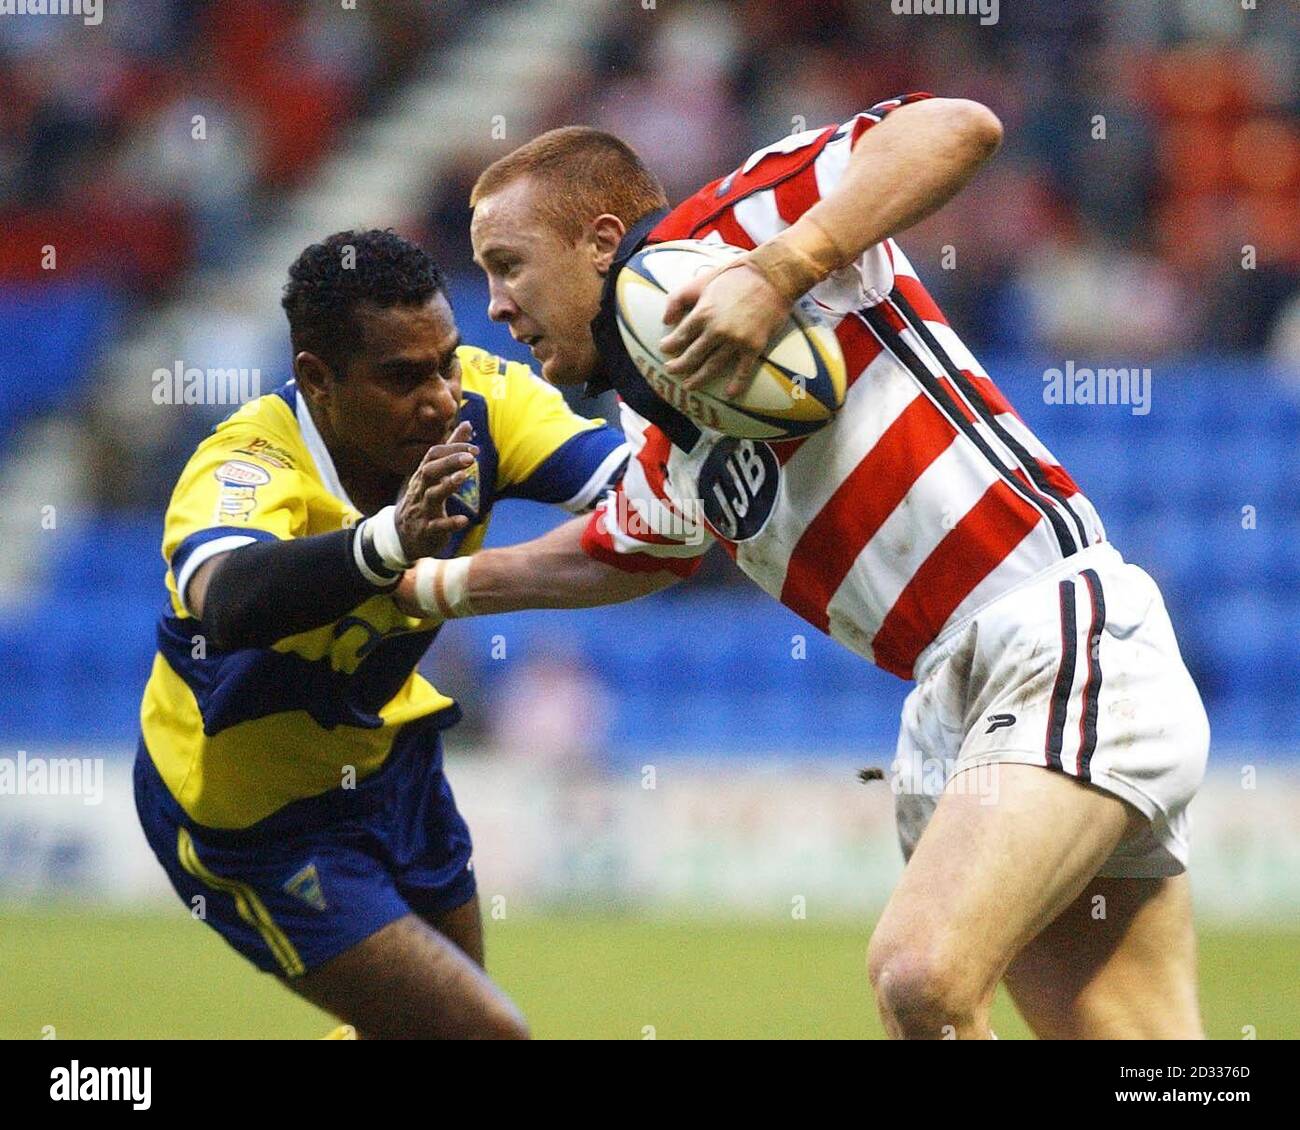 Wigan's Kris Radlinski is tackled by Warrington's Graham Appo during the Tetley's Super League play-off at the JJB Stadium, Wigan. Stock Photo